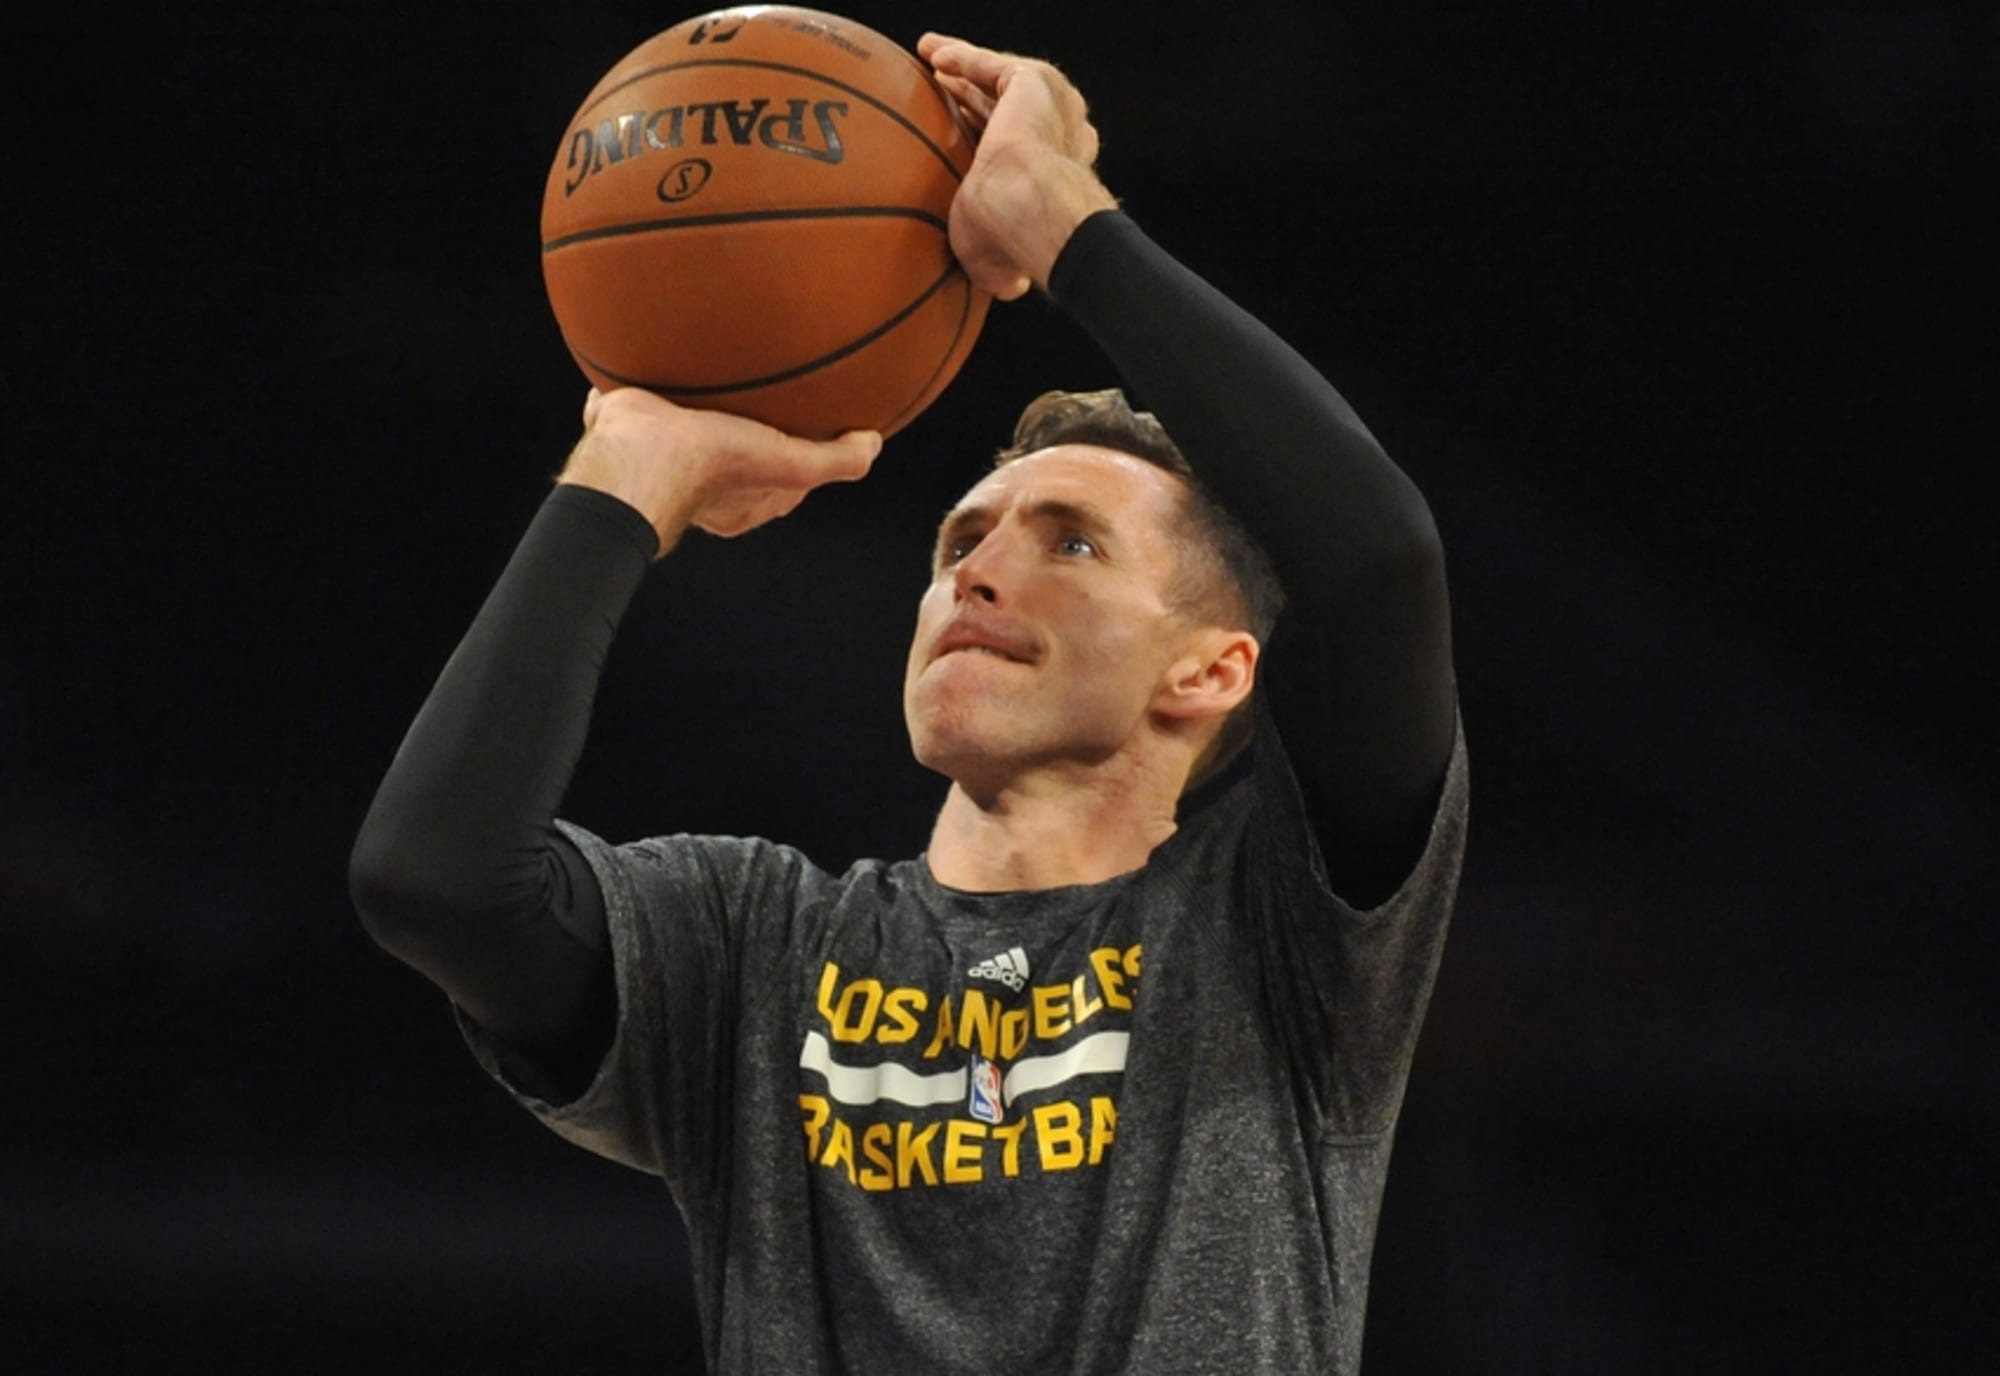 Crazy Stats - Steve Nash shot 50.4% from the field, 43.5% from 3